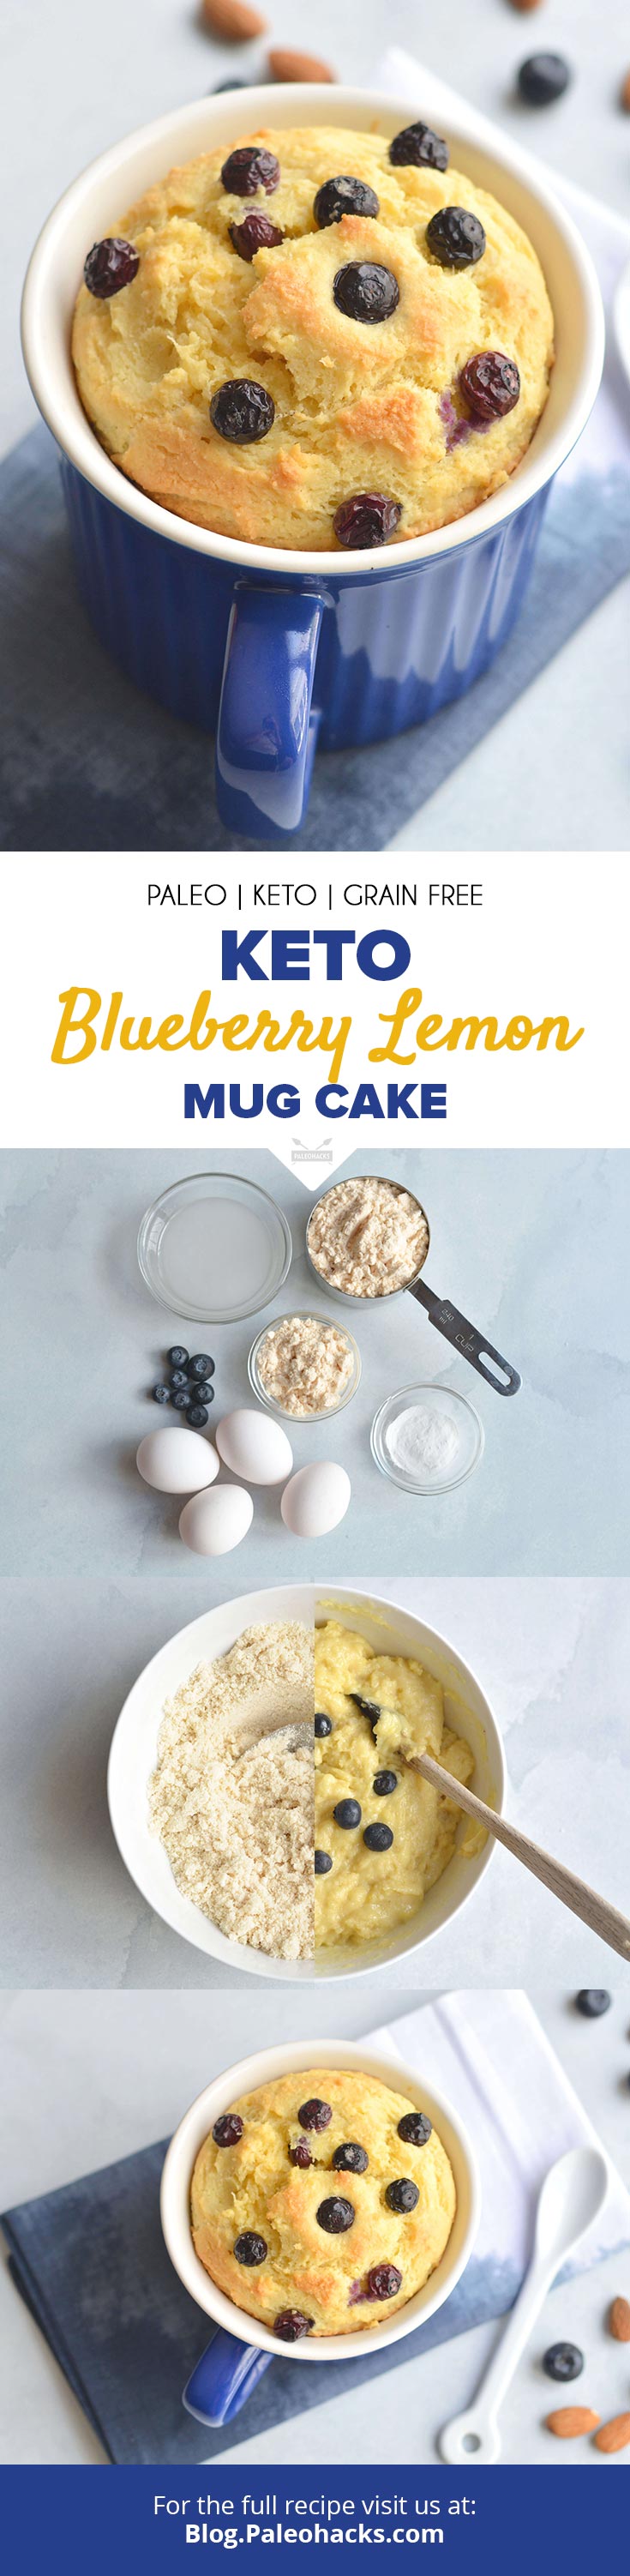 Fall in love with a Keto Blueberry Lemon Mug Cake you can bake up in just 25 minutes. Mug cakes are the perfect way to treat yourself without overindulging.